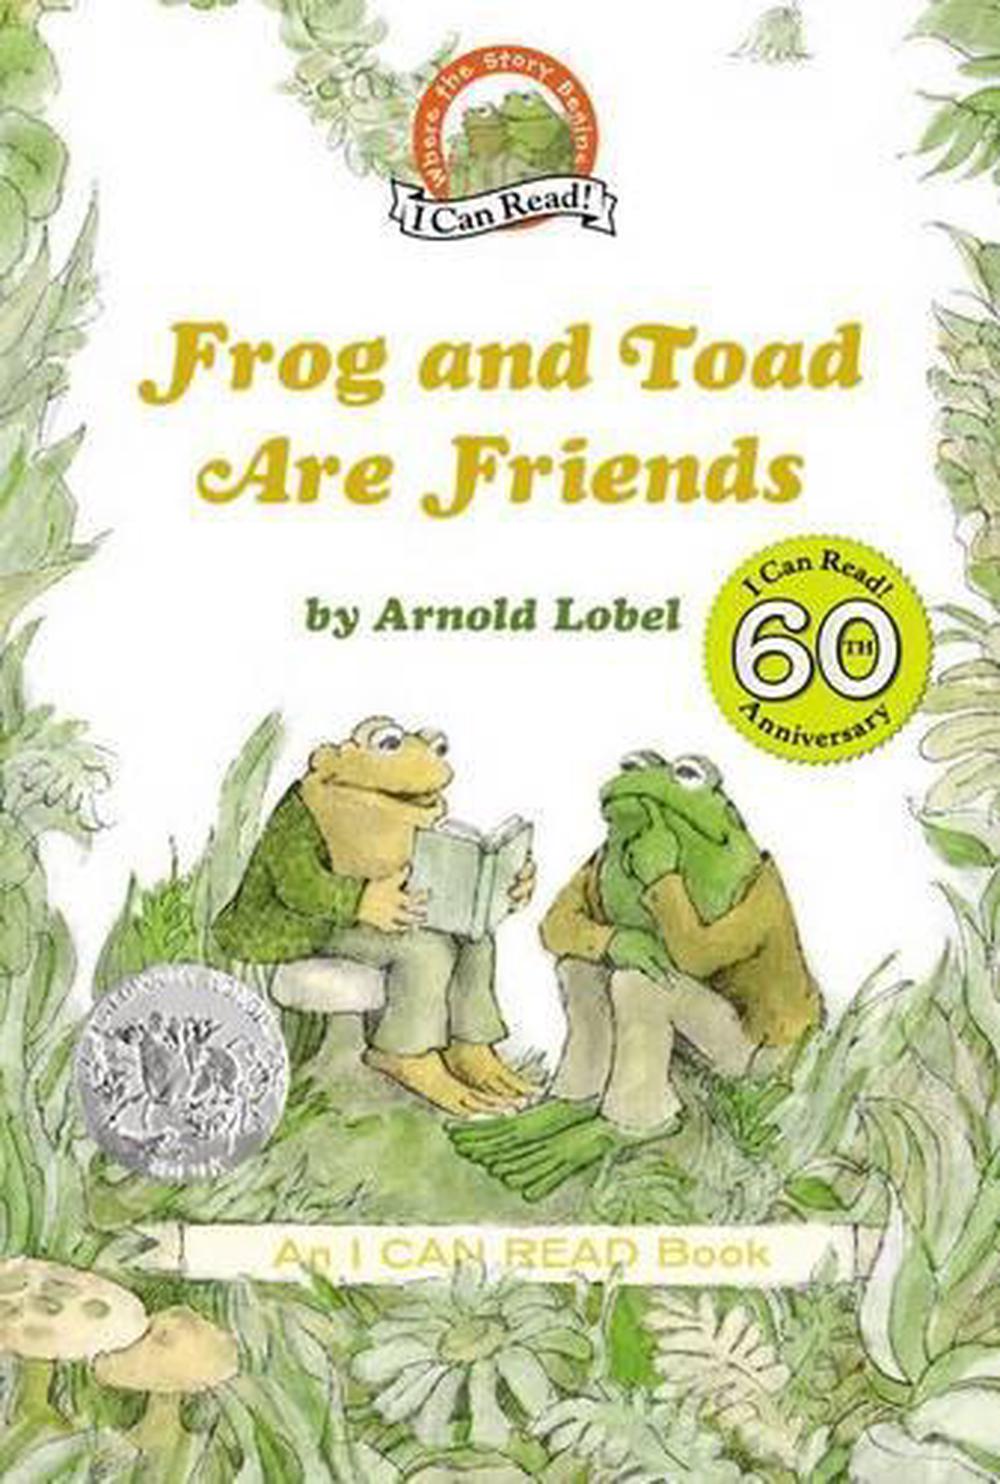 frog-and-toad-are-friends-by-arnold-lobel-english-hardcover-book-free